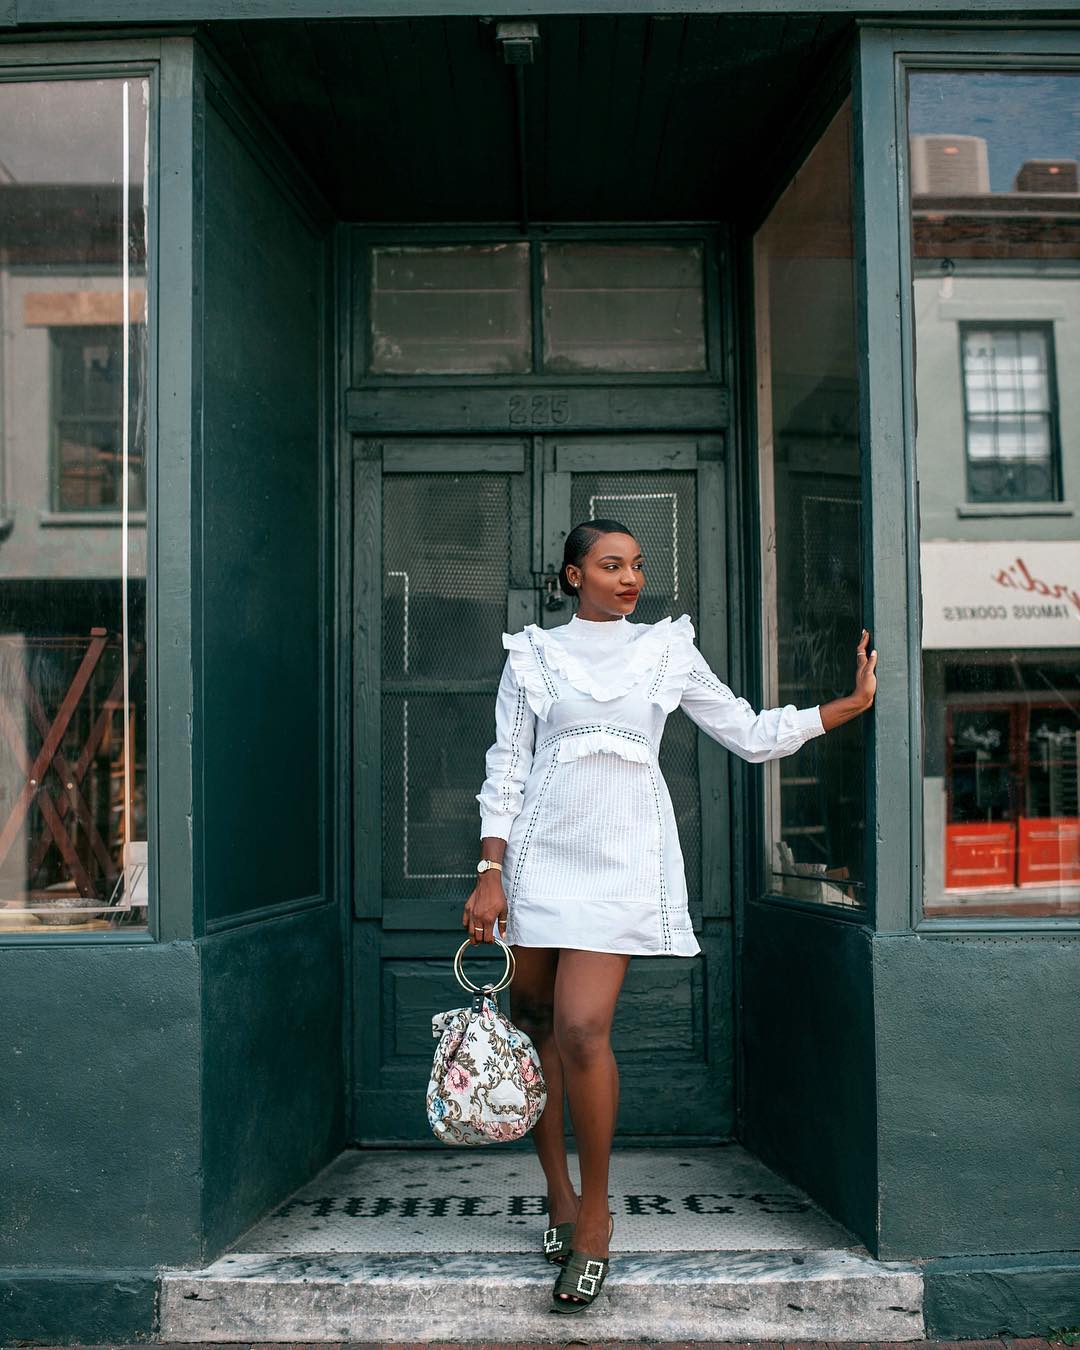 All White Party Outfit Ideas For Women: Street Style Inspiration 2019  All white  party dresses, All white party outfits, White party outfit